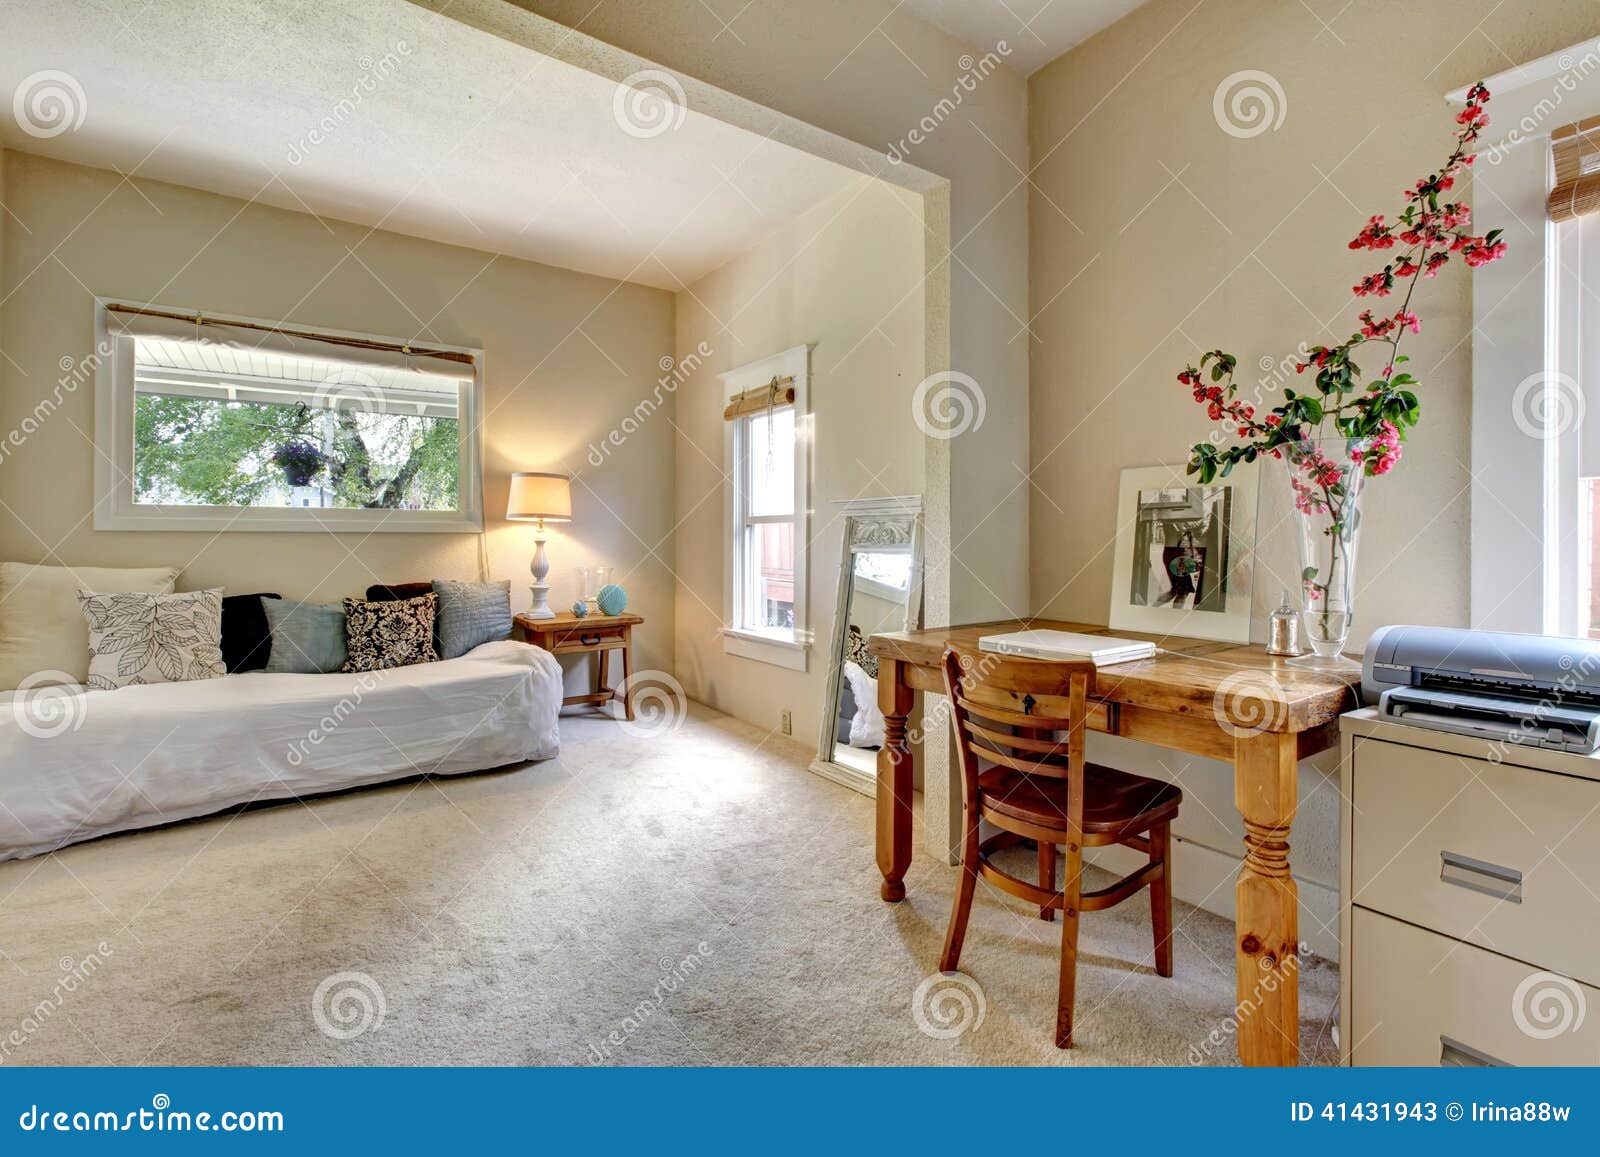 Old House Interior. Stock Photo - Image: 41431943